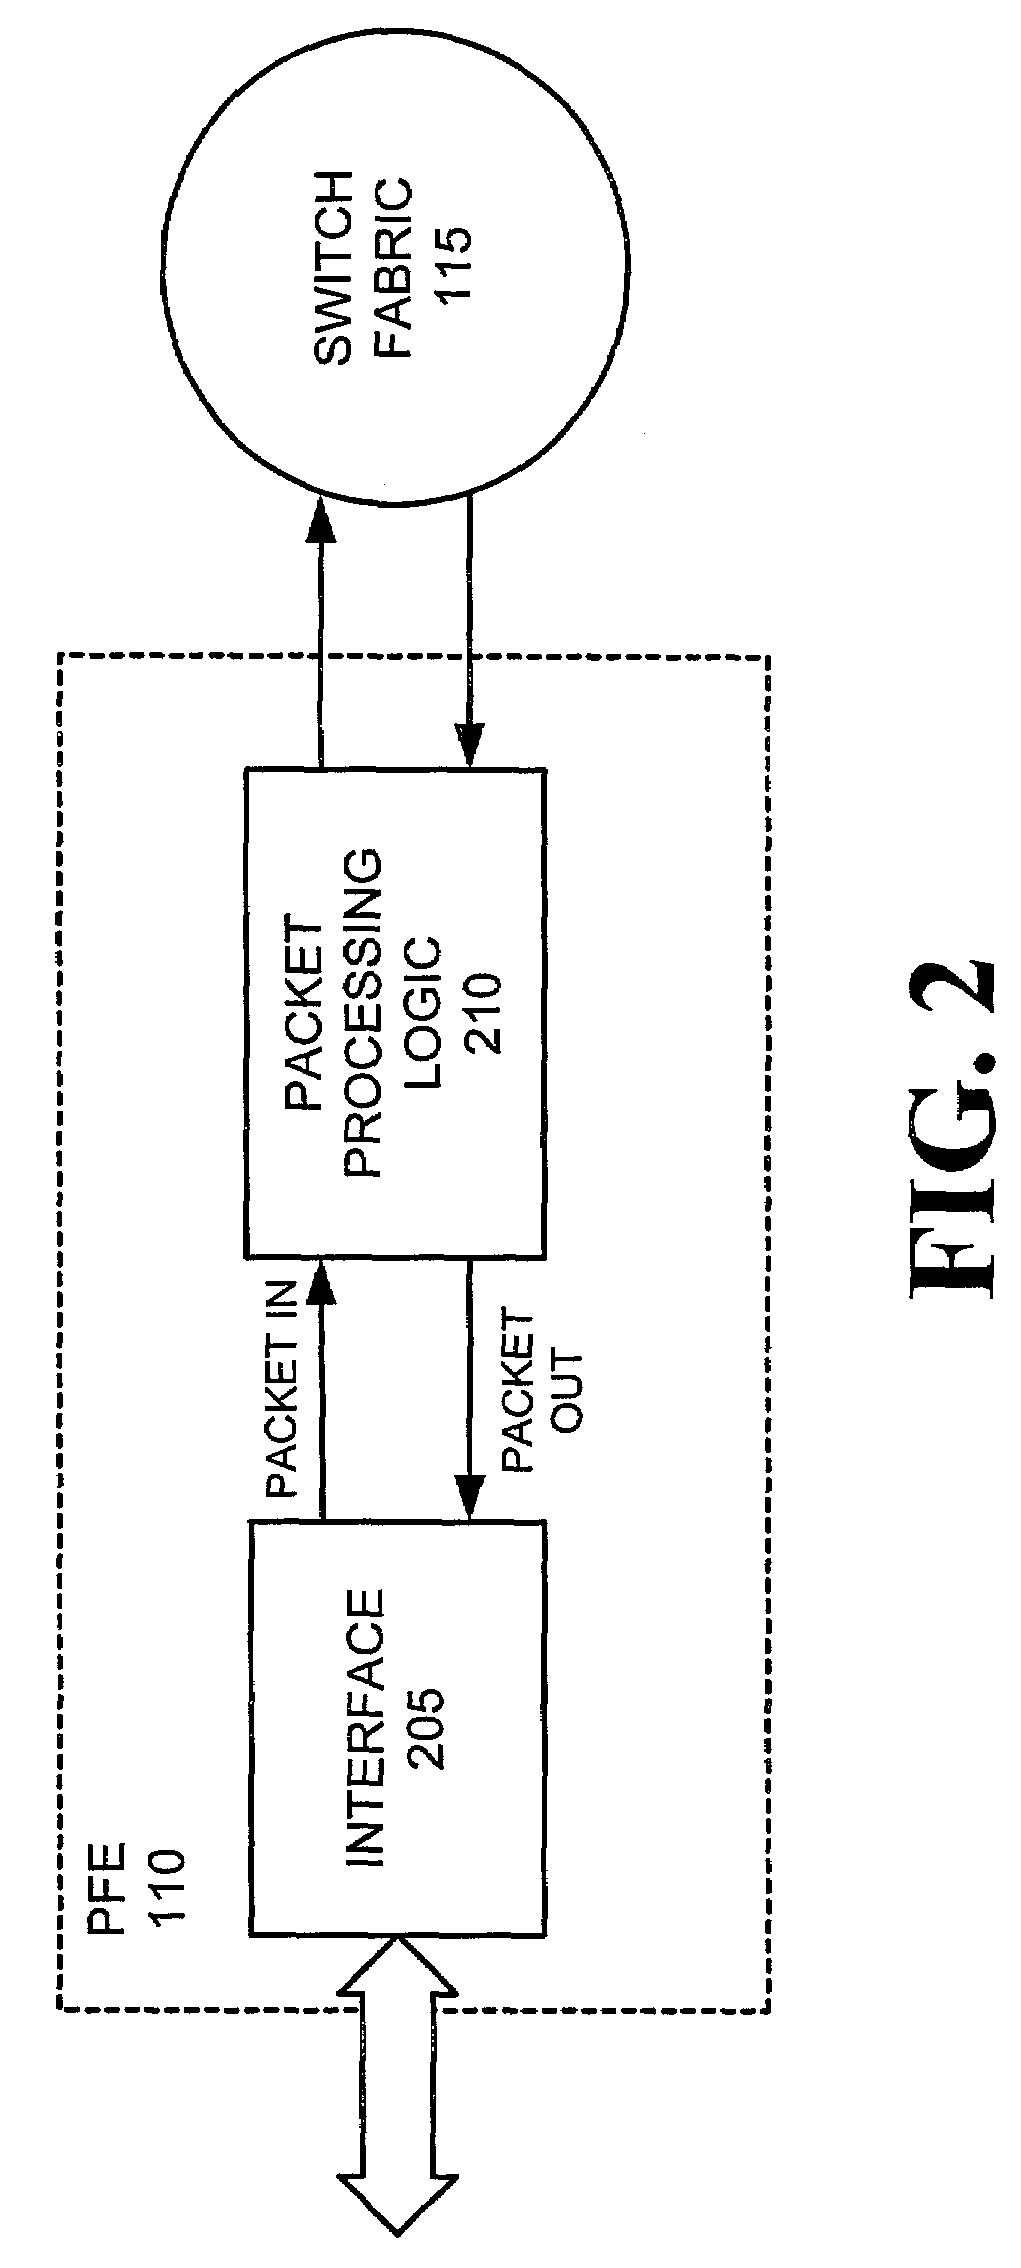 Systems and methods for implementing end-to-end checksum